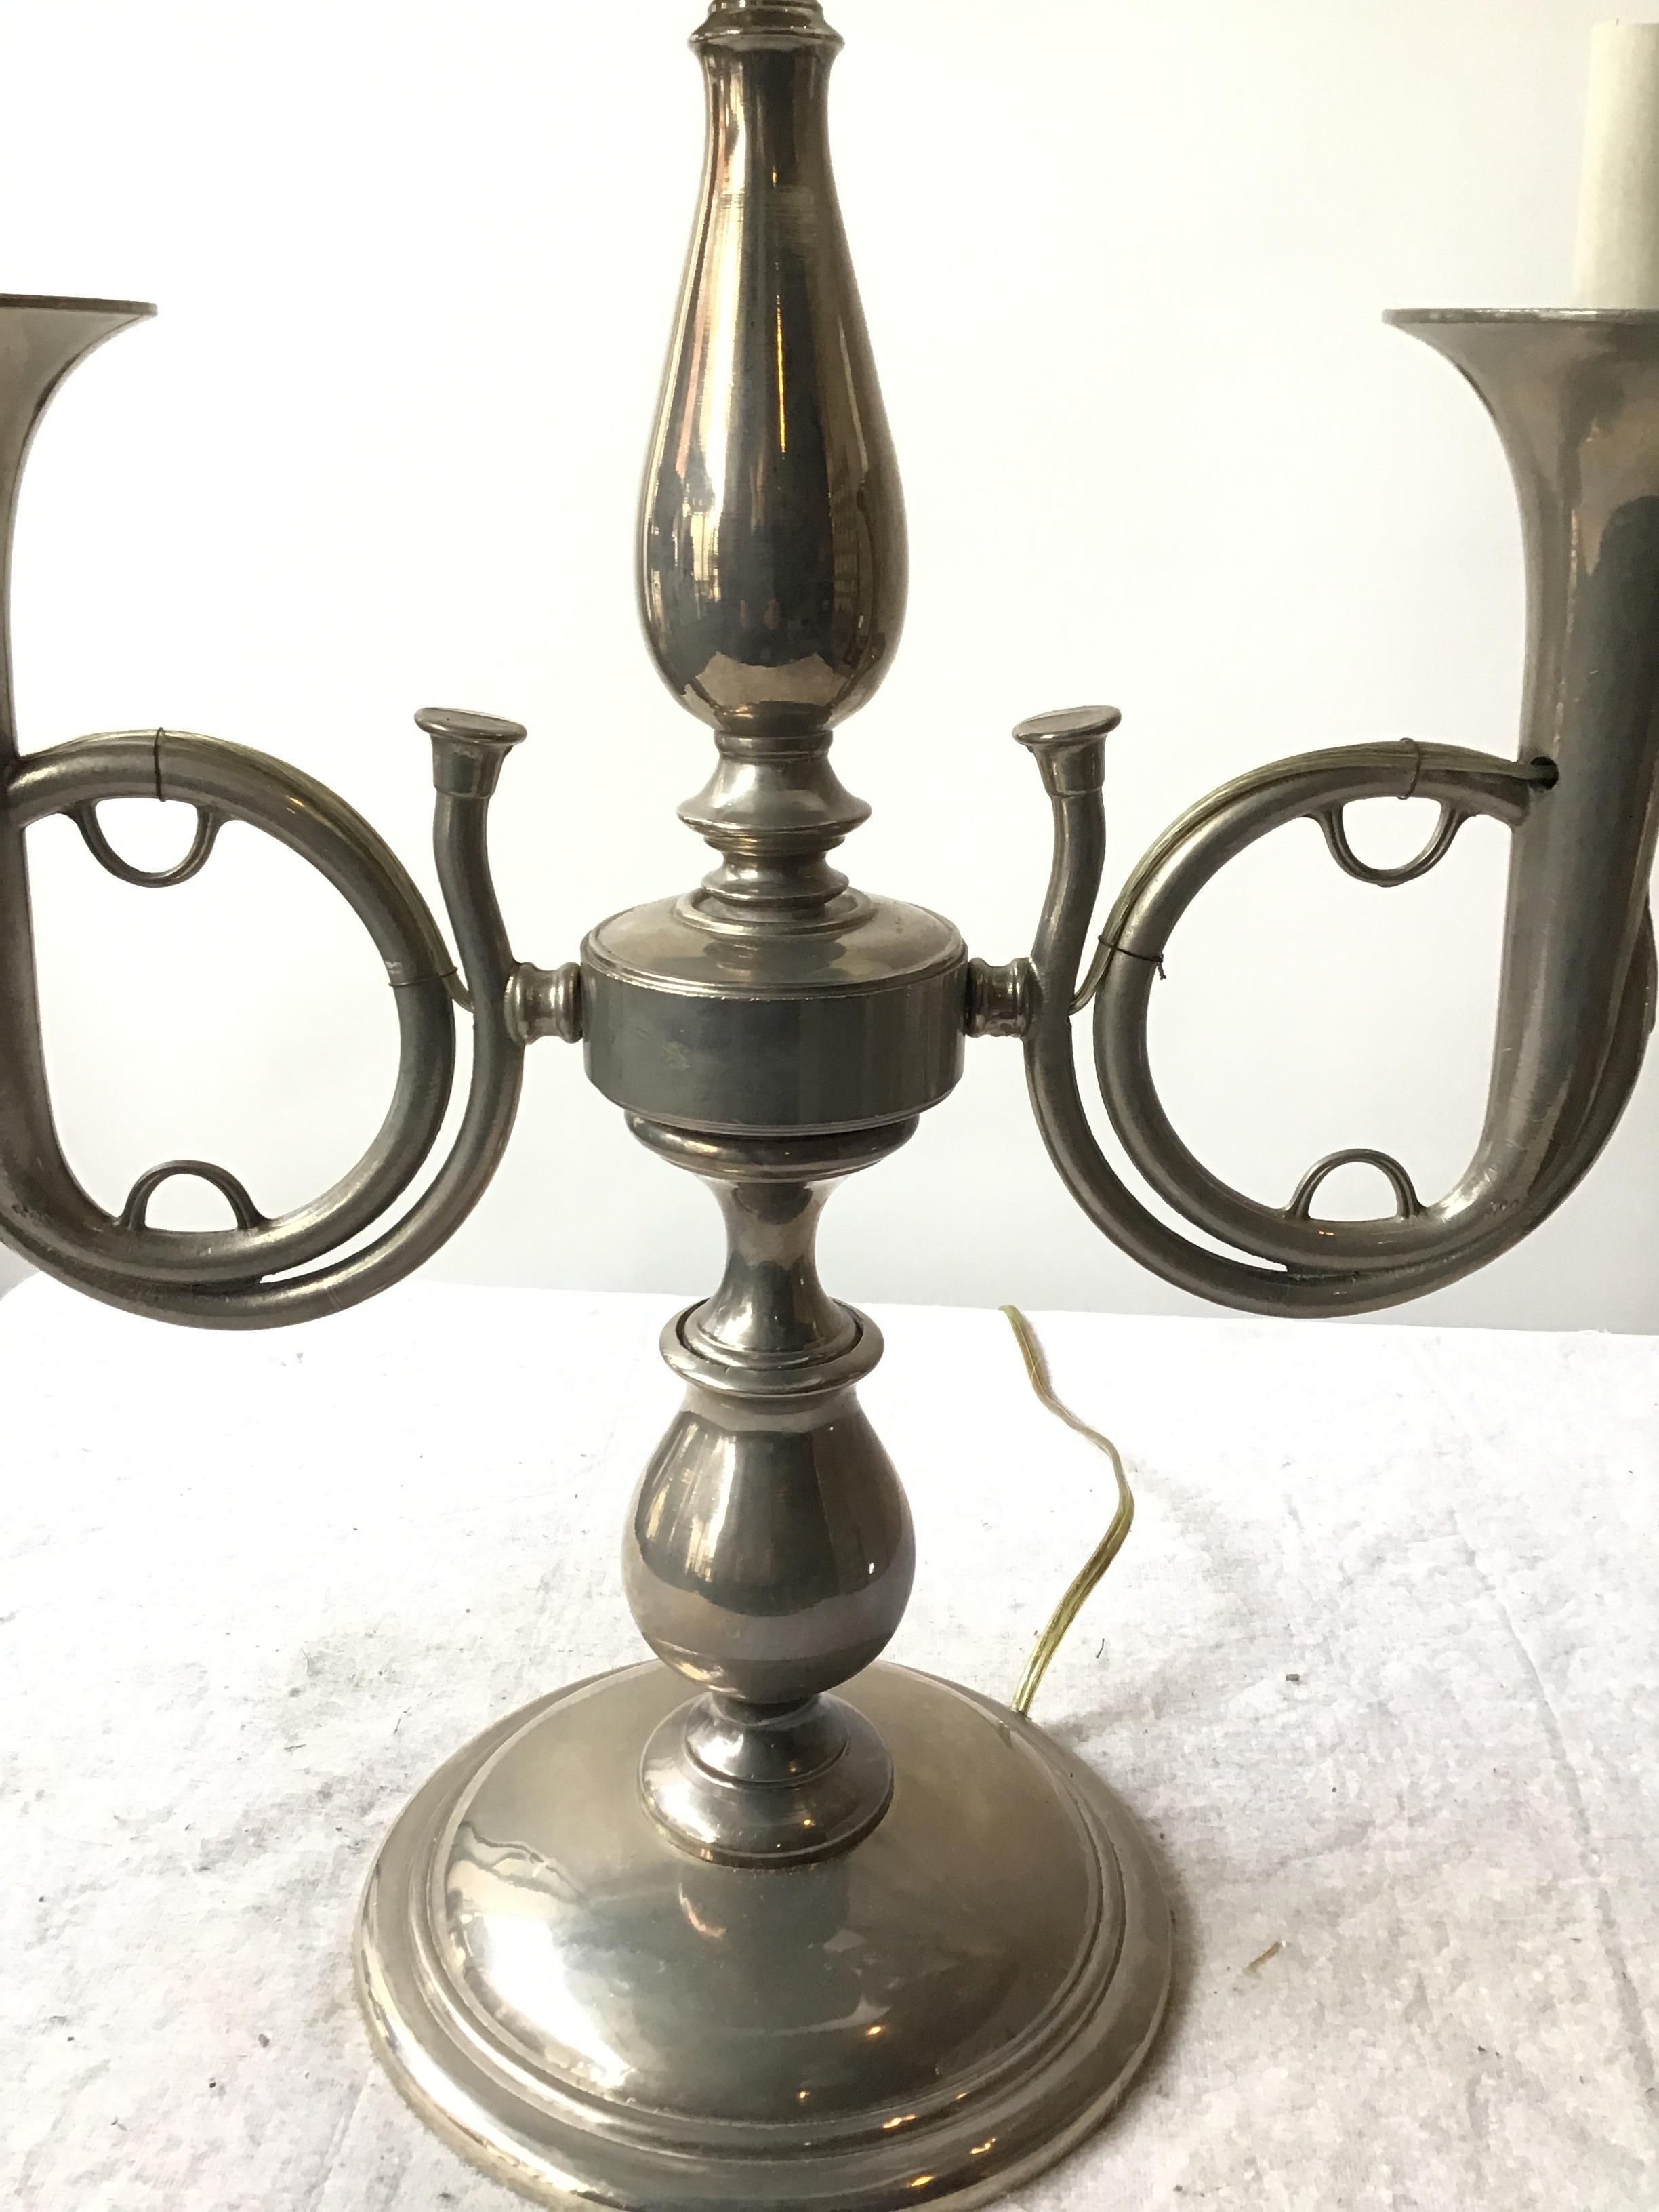 1970s Pewter Trumpet Lamp With Adjustable Tole Shade For Sale 2